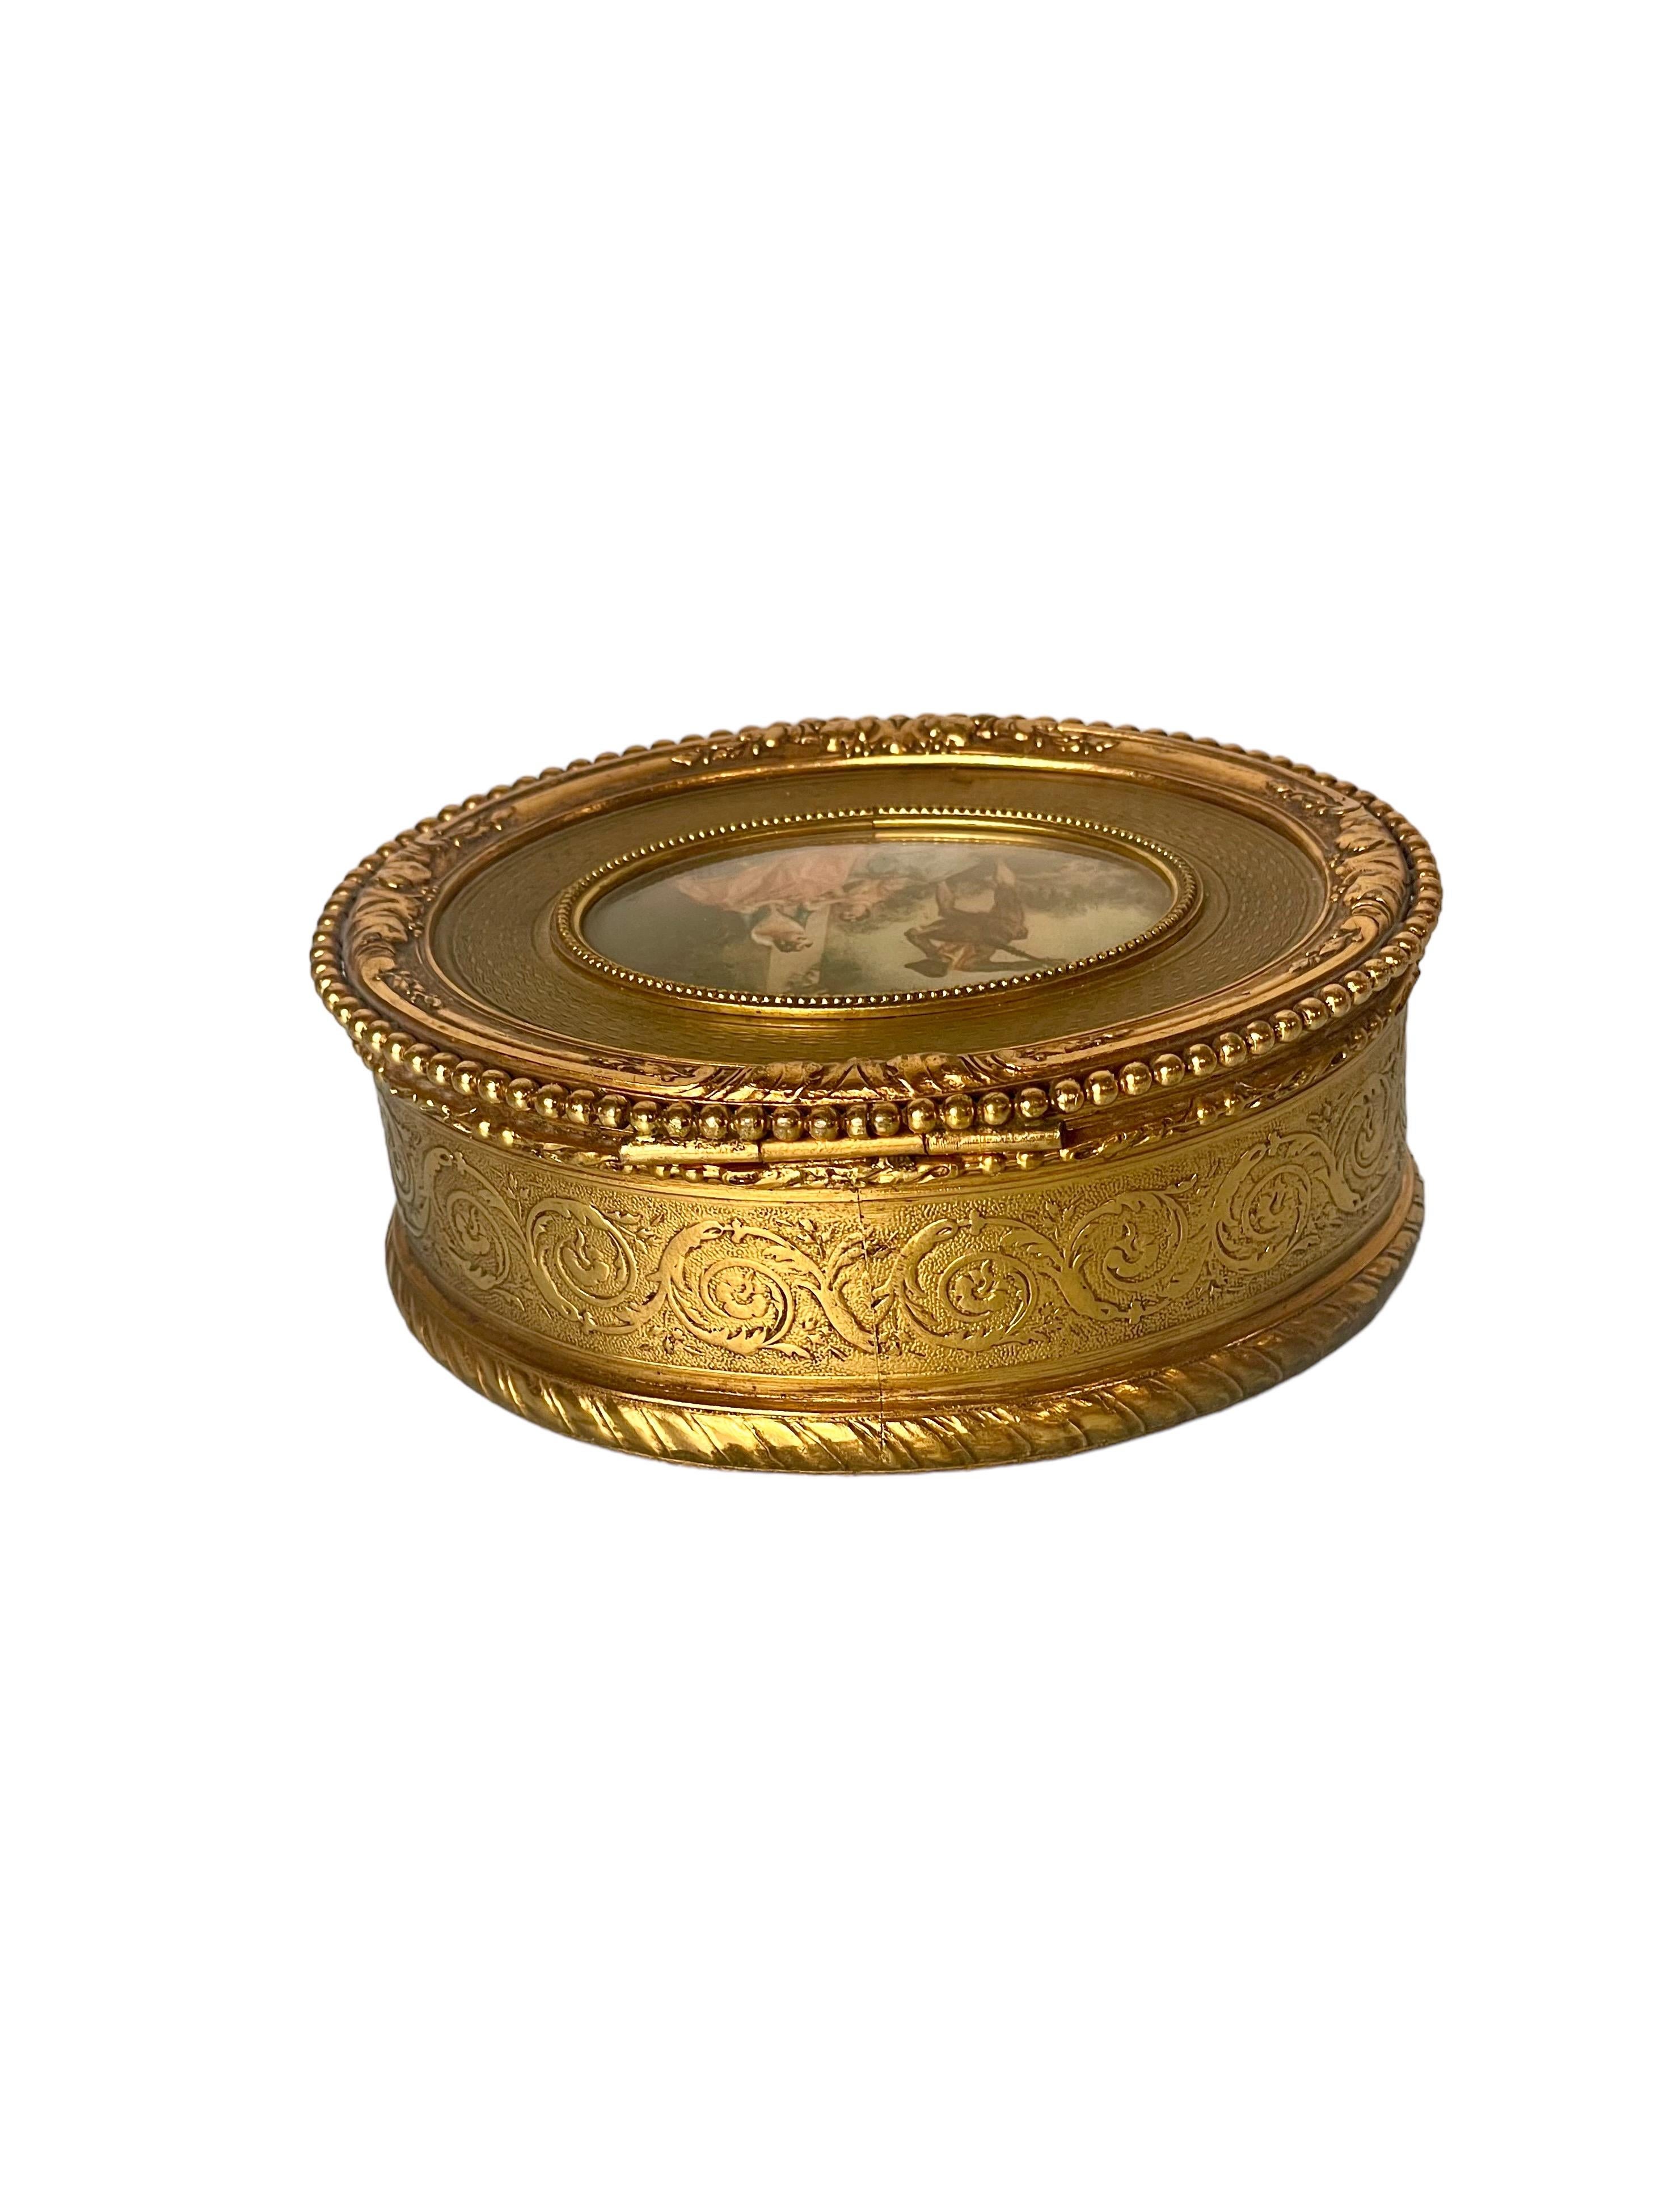 A very pretty oval-shaped jewellery box in gilt bronze, with an exquisite central miniature of a young man serenading two young ladies with a lute. This Louis XVI style box is stunningly detailed with an elaborate string-of-pearls design all round